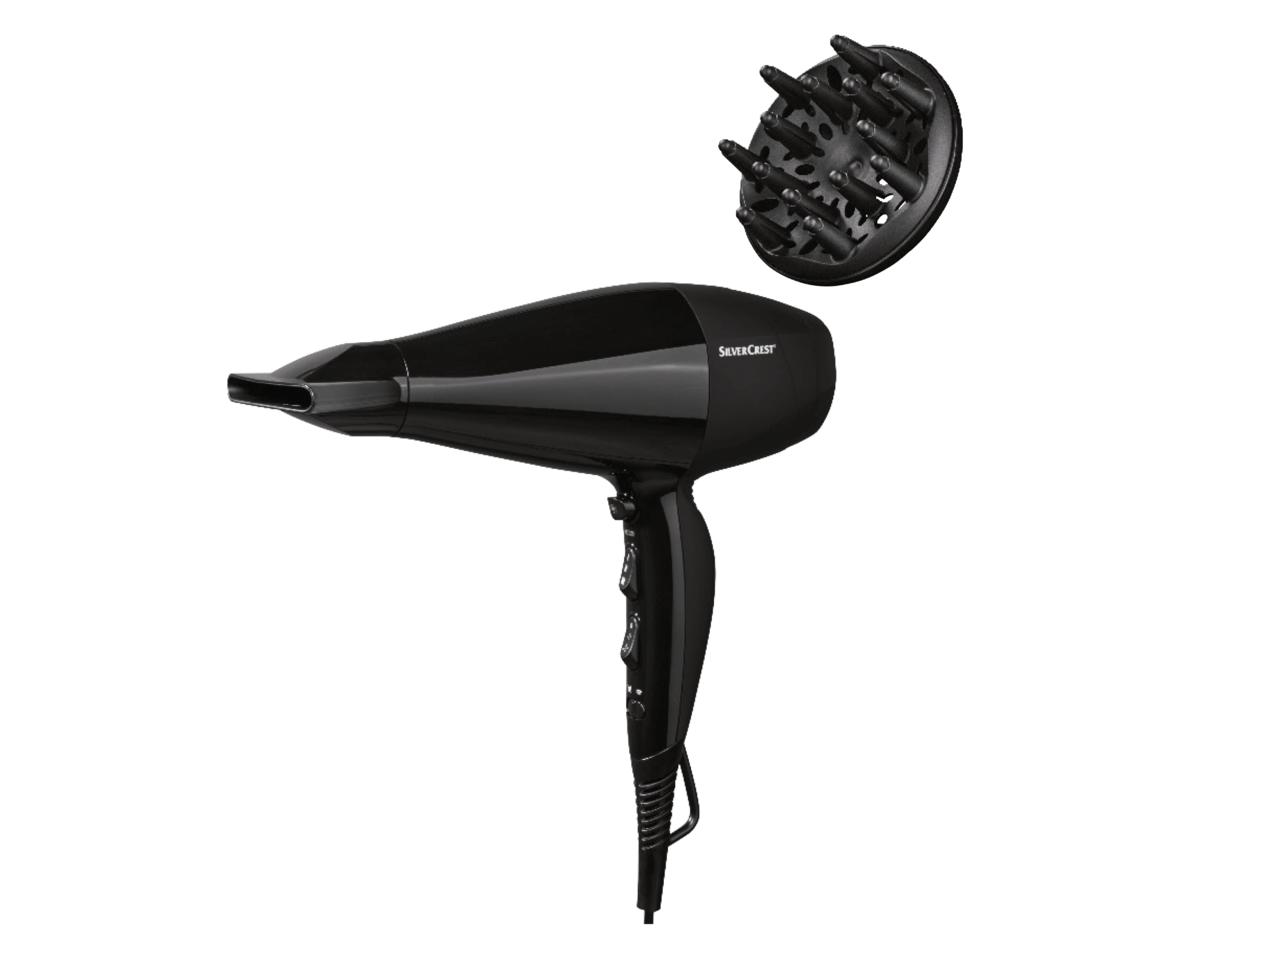 SILVERCREST PERSONAL CARE 2100W Professional Ionic Hair Dryer